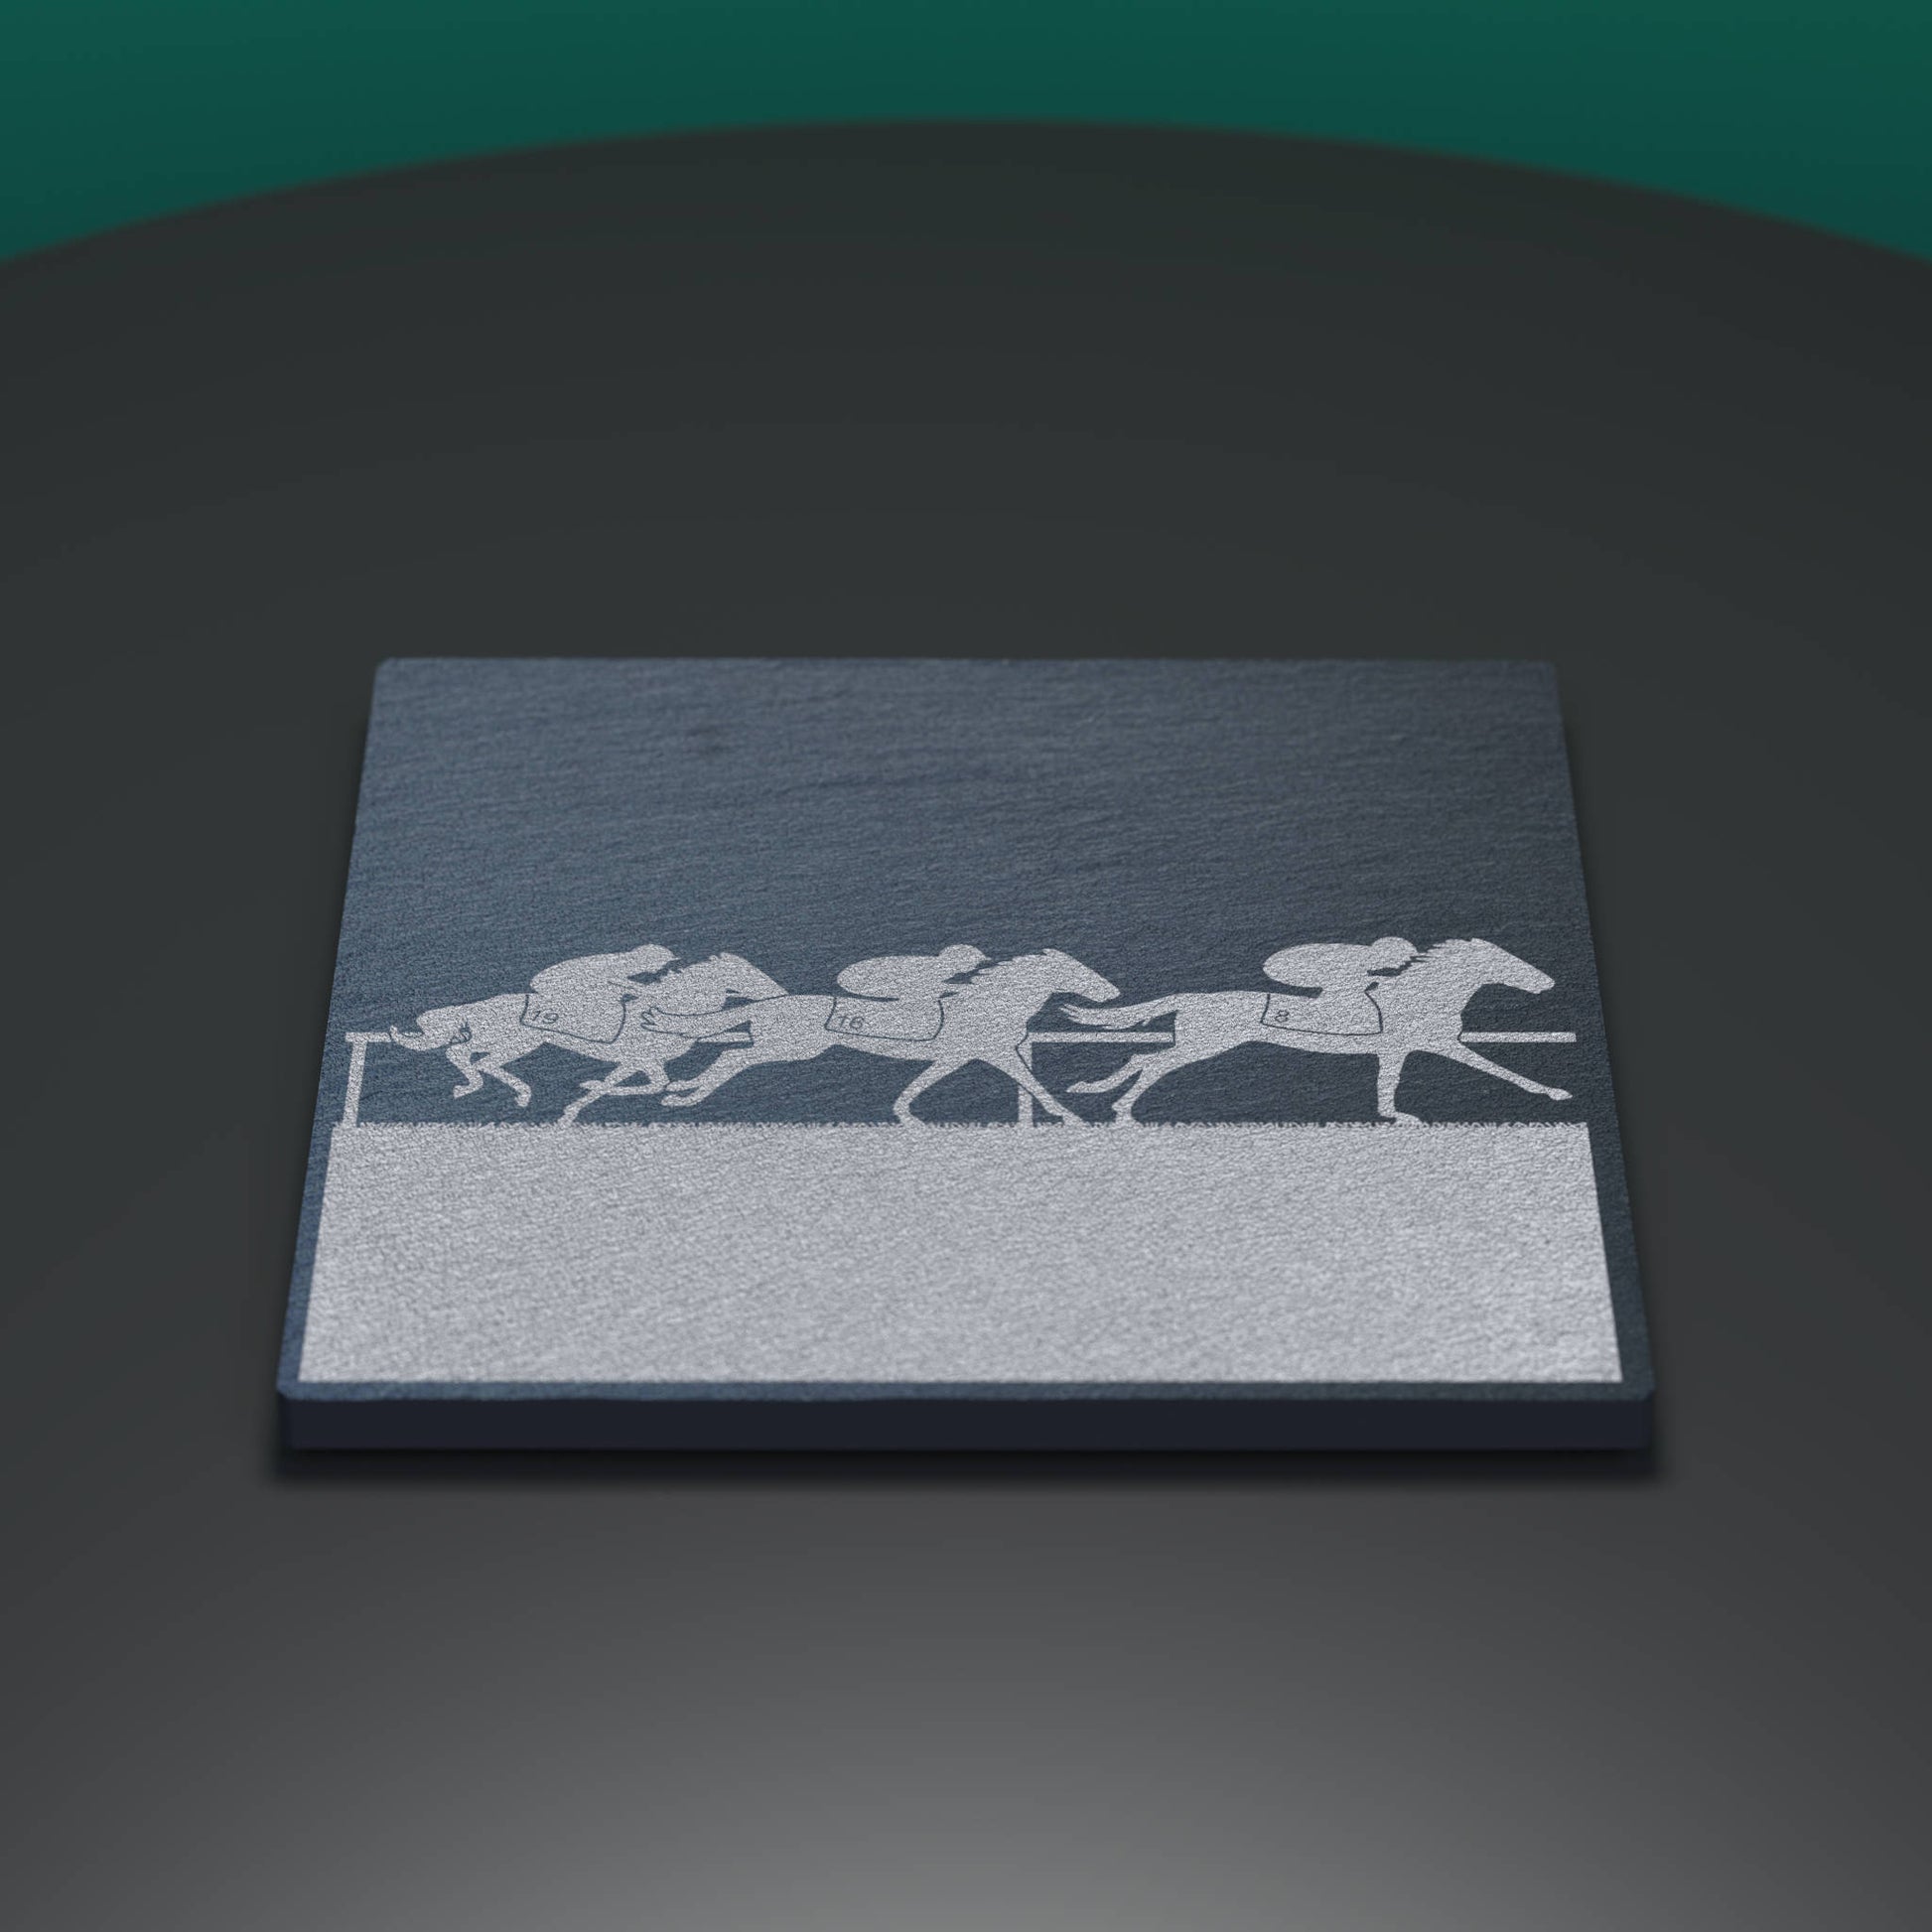 Slate coaster engraved with a horse racing scene